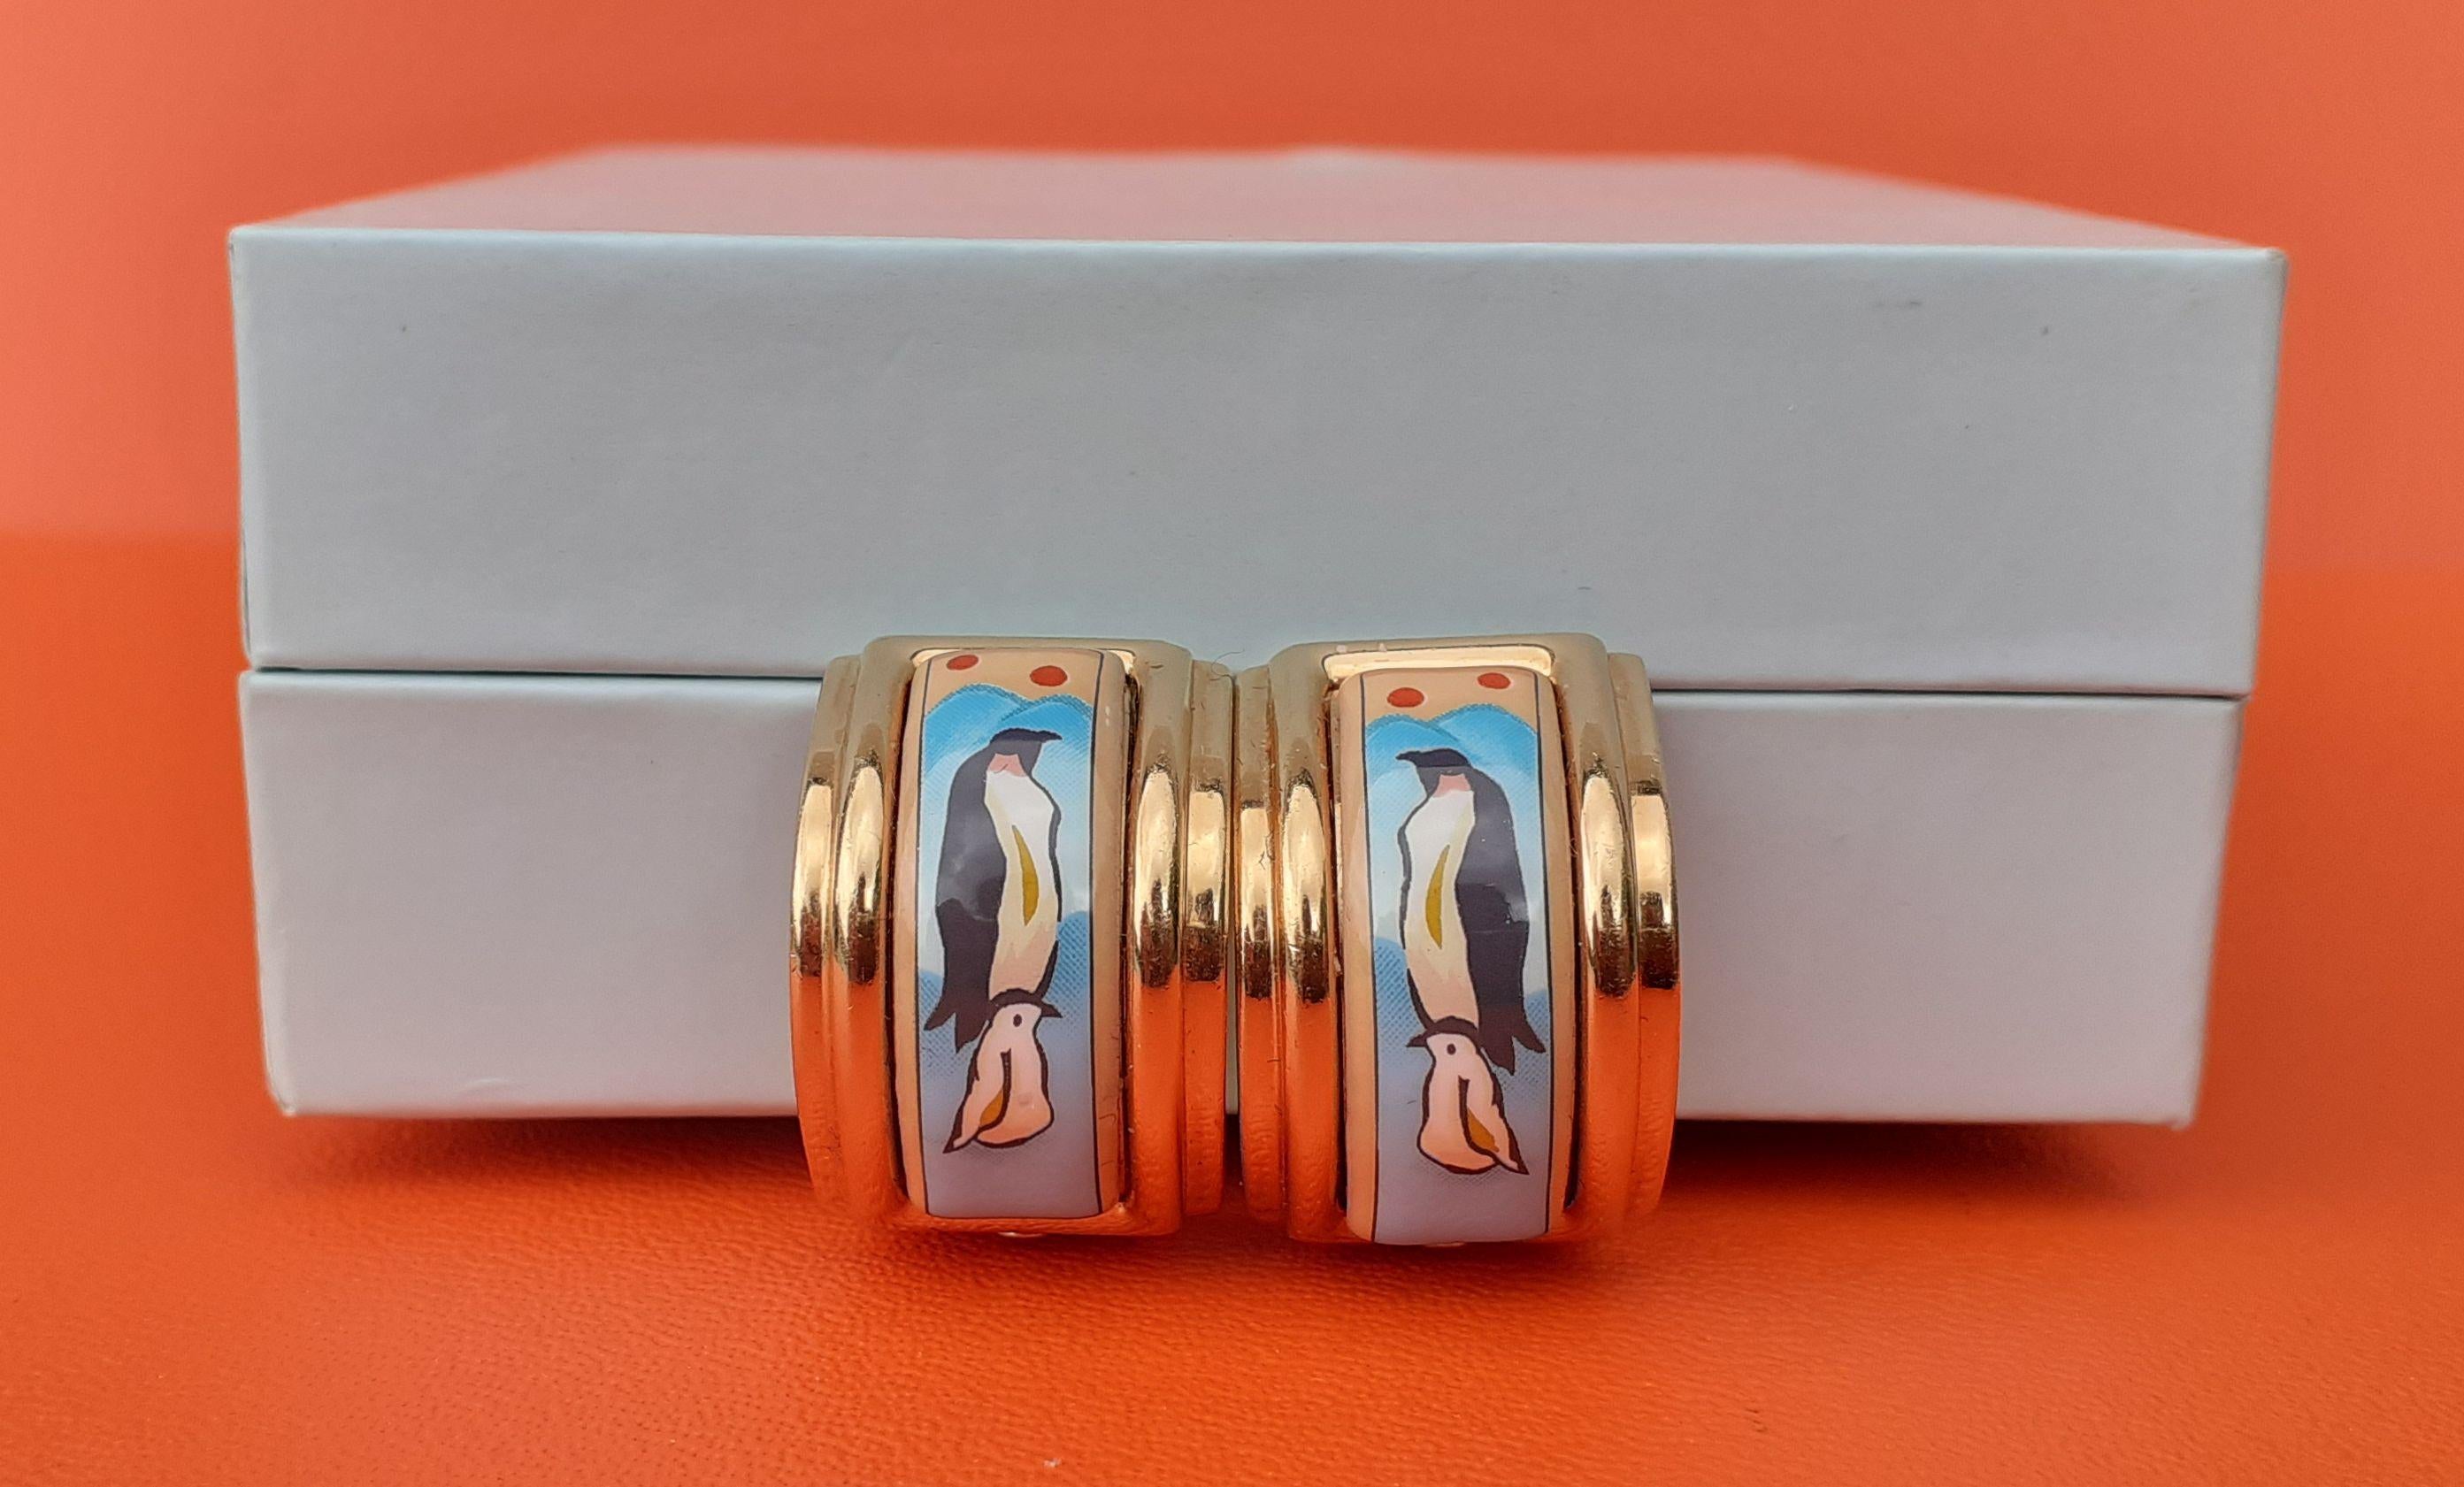 Adorable Authentic Hermès Earrings

Pattern: Penguins 

Super Rare, Hard to find ! 

Clip-on earrings, will fit non pierced ears

Made of Printed Enamel and Gold Plated Hardware

Colorways: Sky Blue Background, White and Black Penguins, Yellow Sky